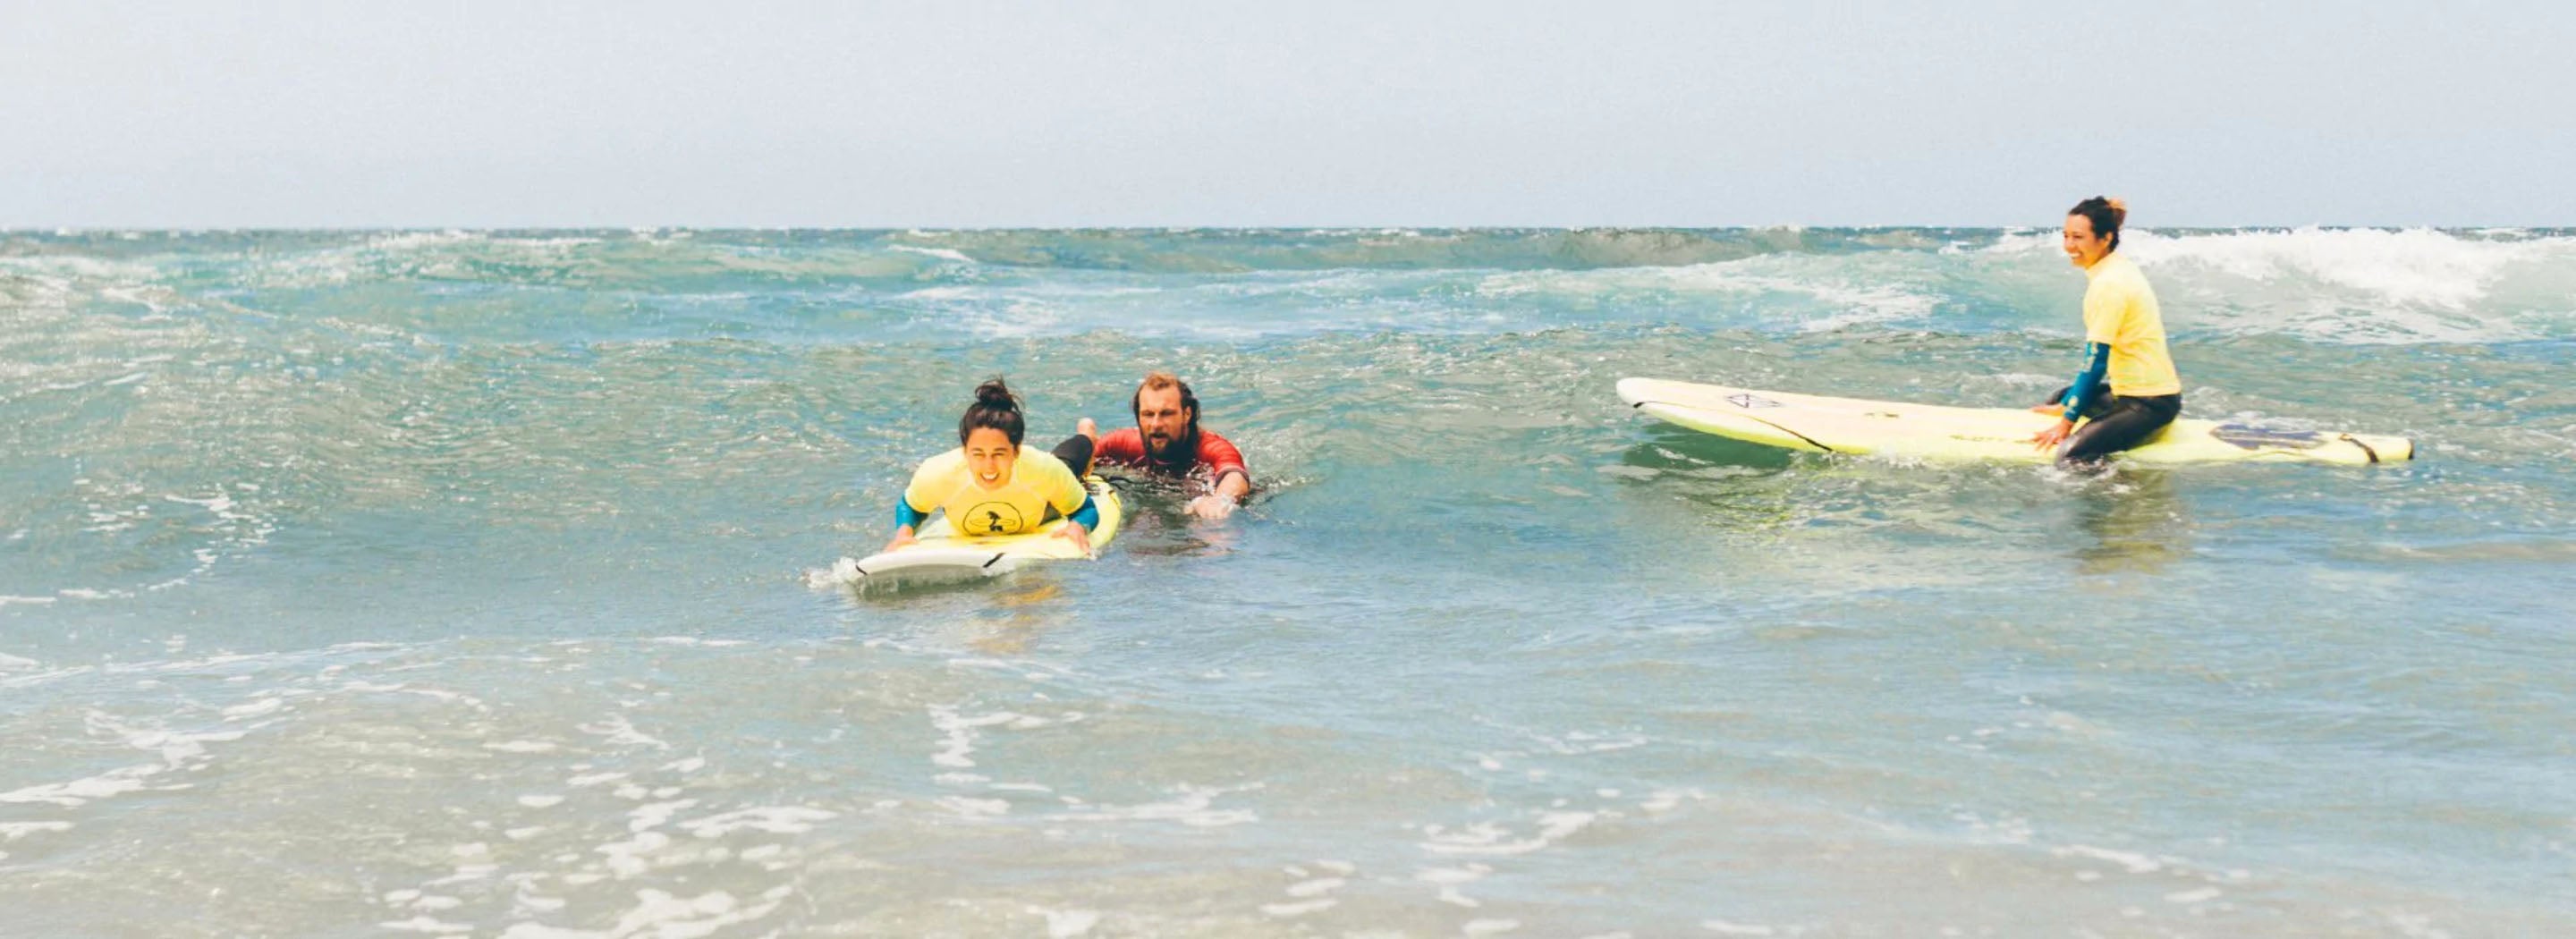 San Diego Surf and SUP Lessons